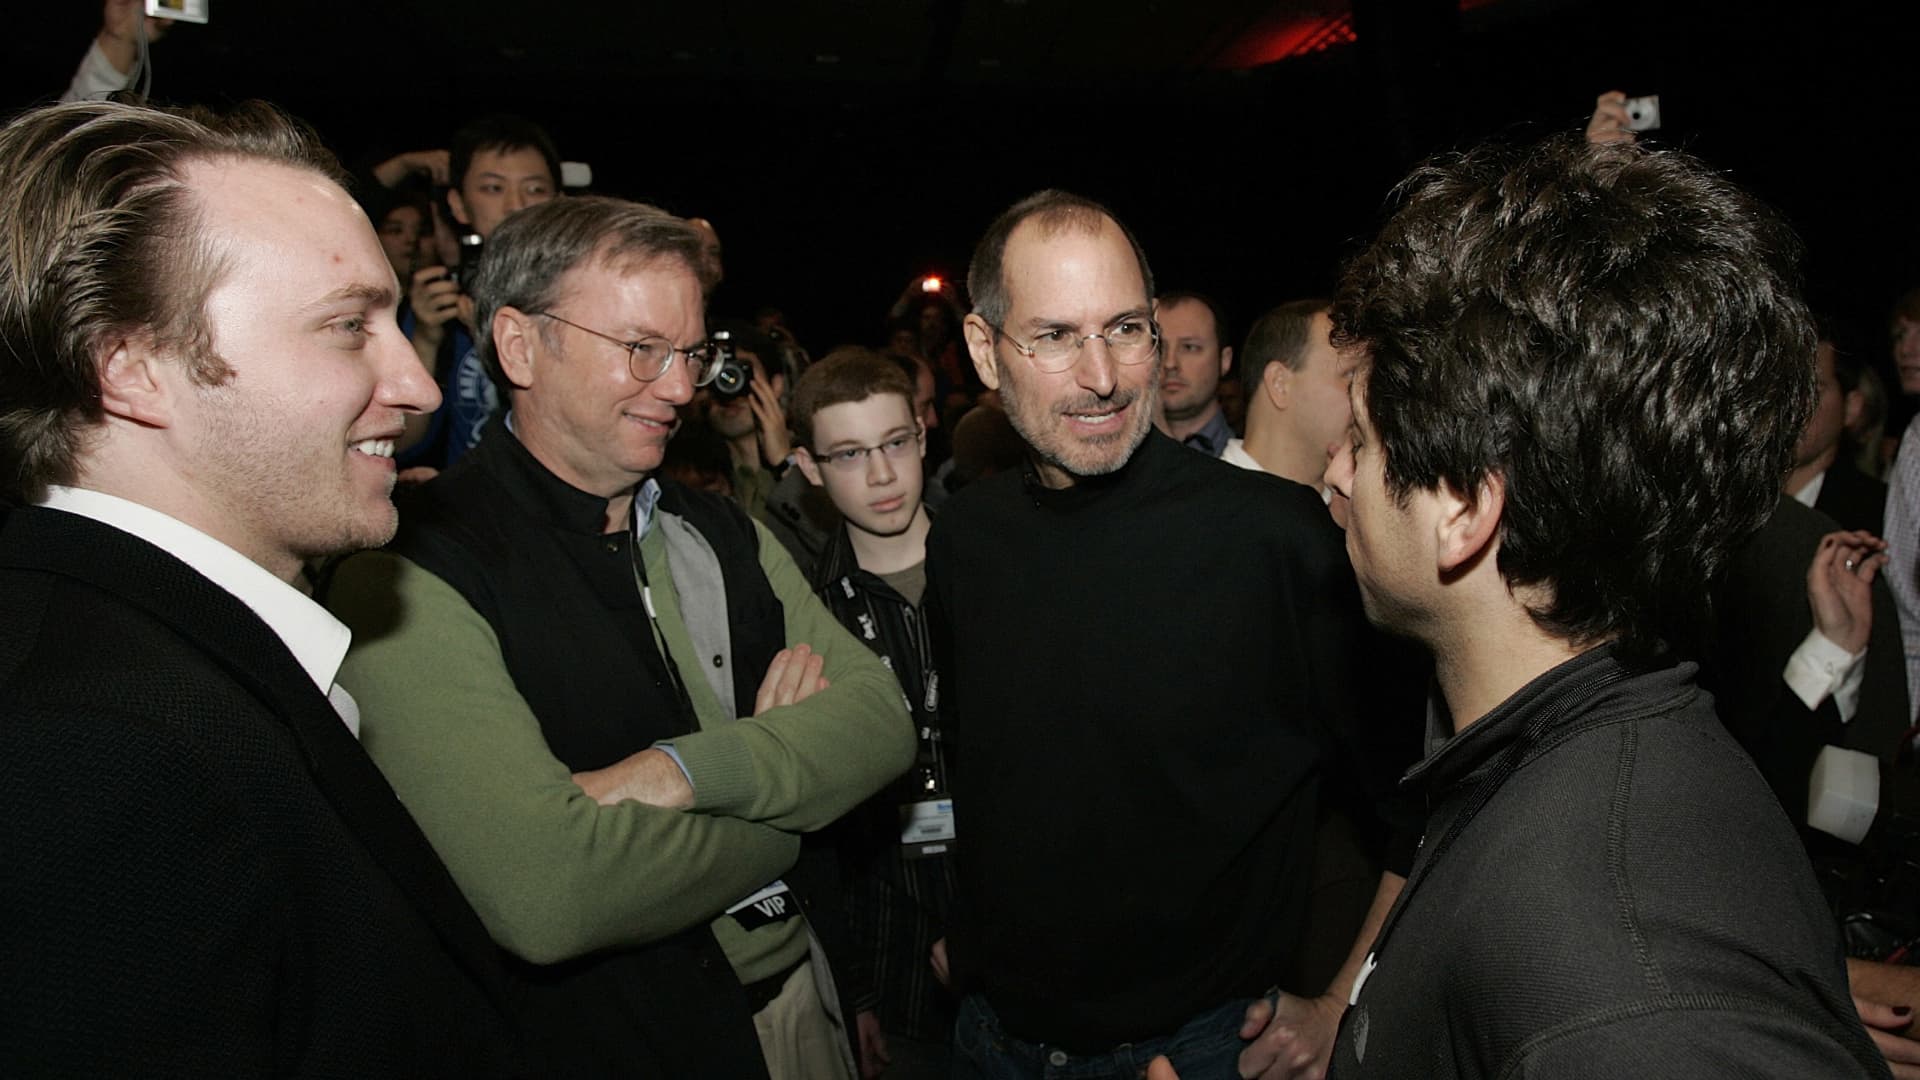 You Tube founder, Chad Hurley, Google CEO Eric Schmidt, Apple CEO and co-founder Steve Jobs and Google co-founder Sergey Brin, talk after Jobs delivered the keynote speech to kick off the 2008 Macworld at the Moscone Center January 15, 2008 in San Francisco, California.